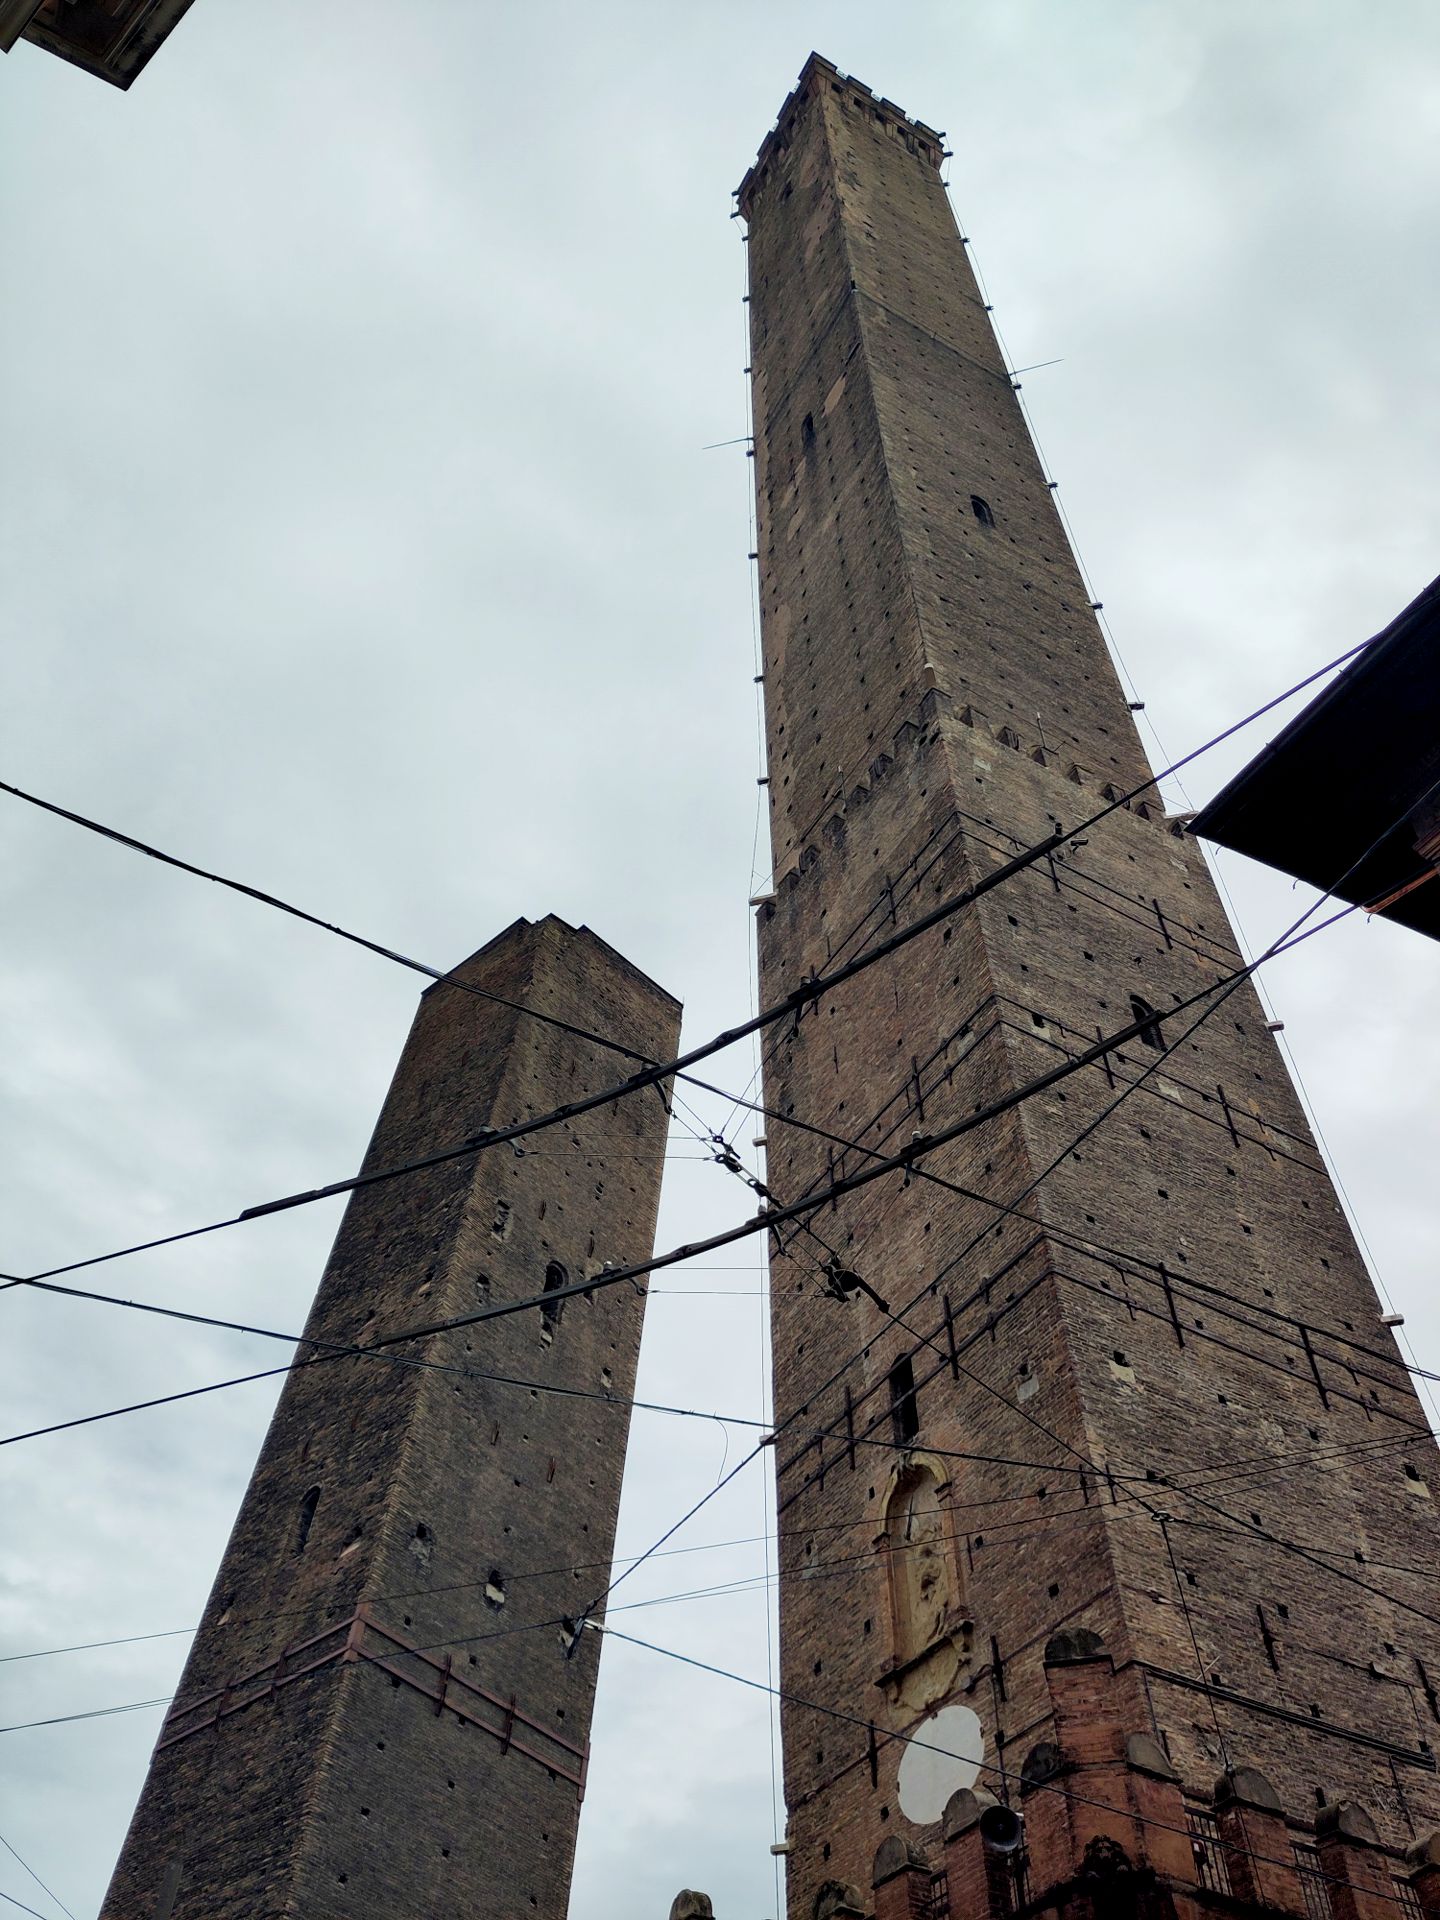 Two grey and not very vertical towers made of stones. In front of them, many interweaving electric cables for the tramway. It's cloudy so all is different shades of grey.